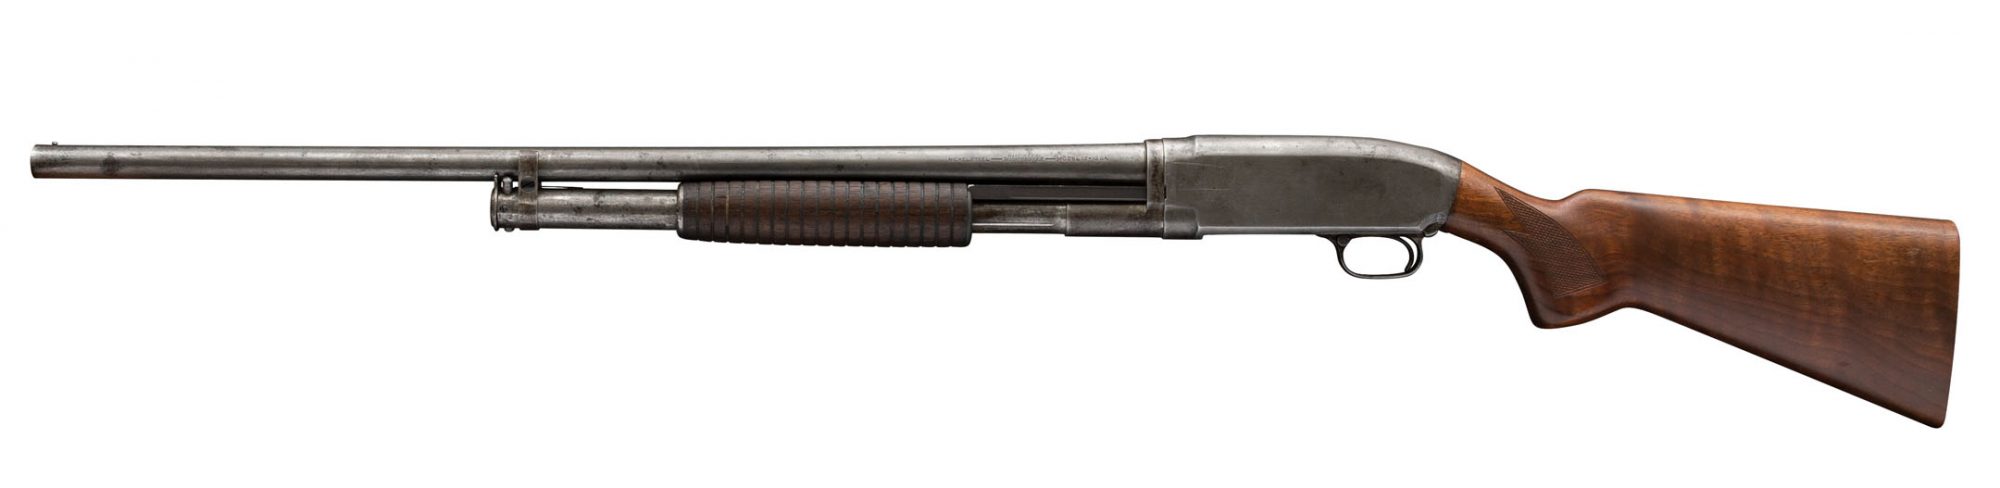 Winchester Model 12 pump-action 12 gauge shotgun from 1927, before being restored in 2023 by Turnbull Restoration of Bloomfield, NY